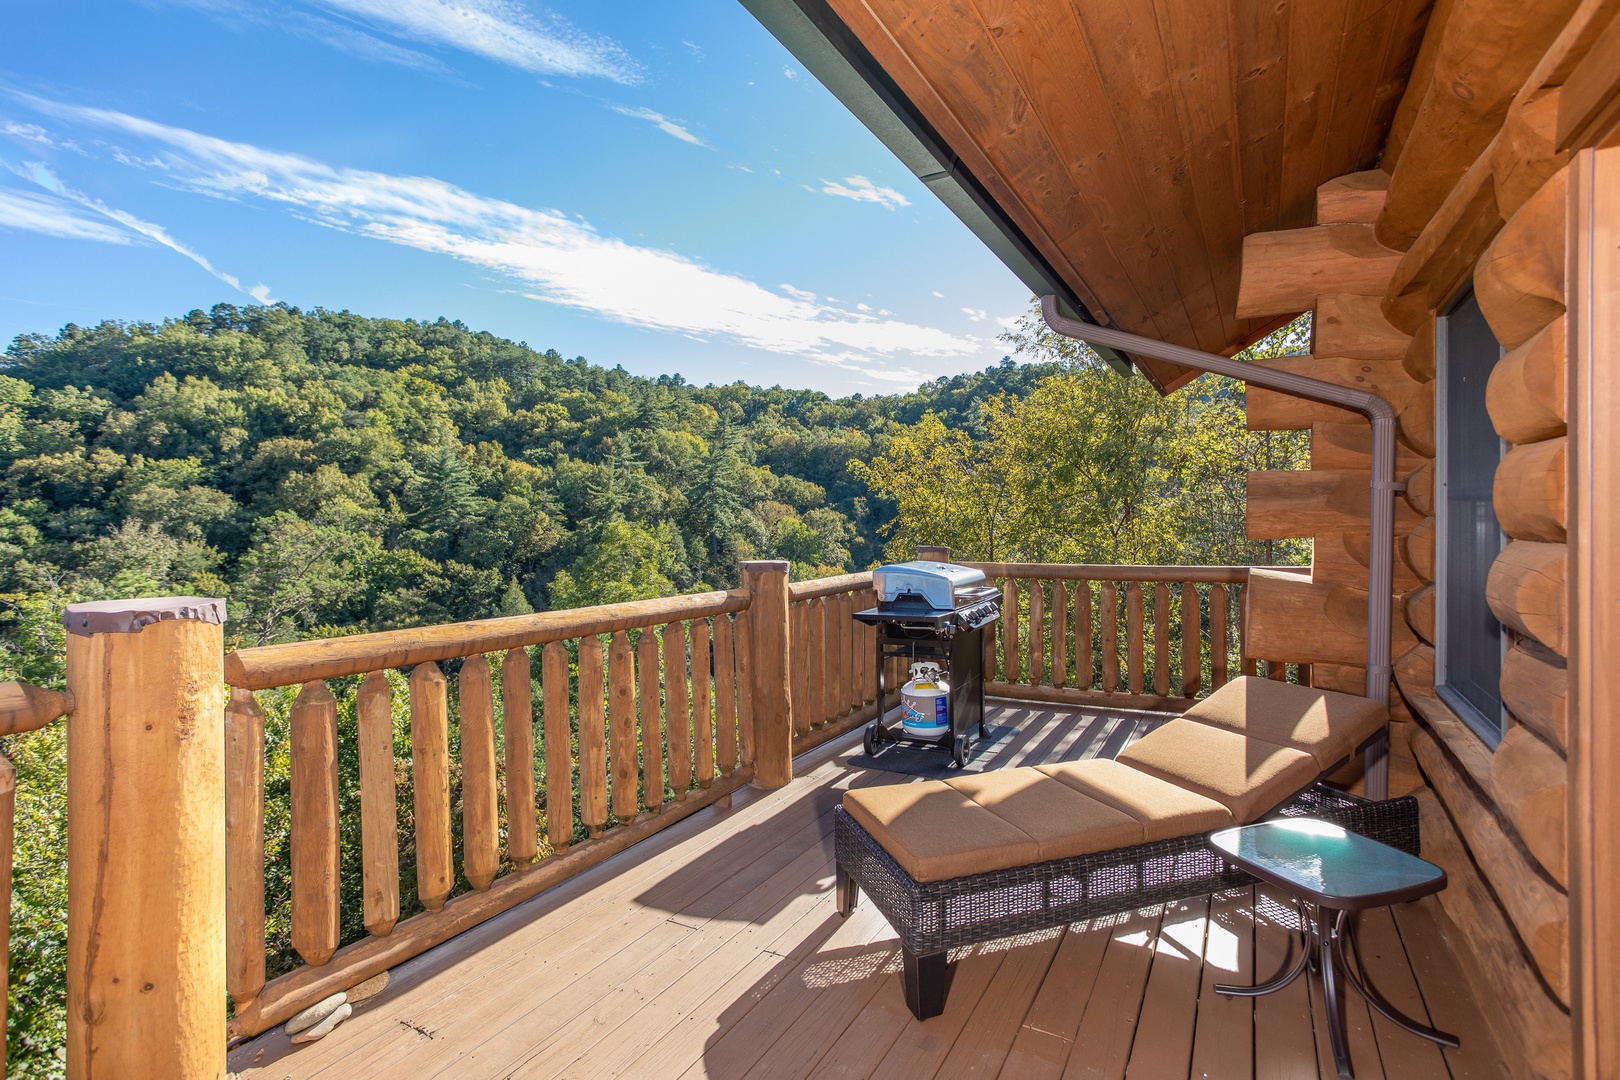 A chaise lounge on the deck overlooking the mountains at Great View Lodge, a 5-bedroom cabin rental located in Pigeon Forge